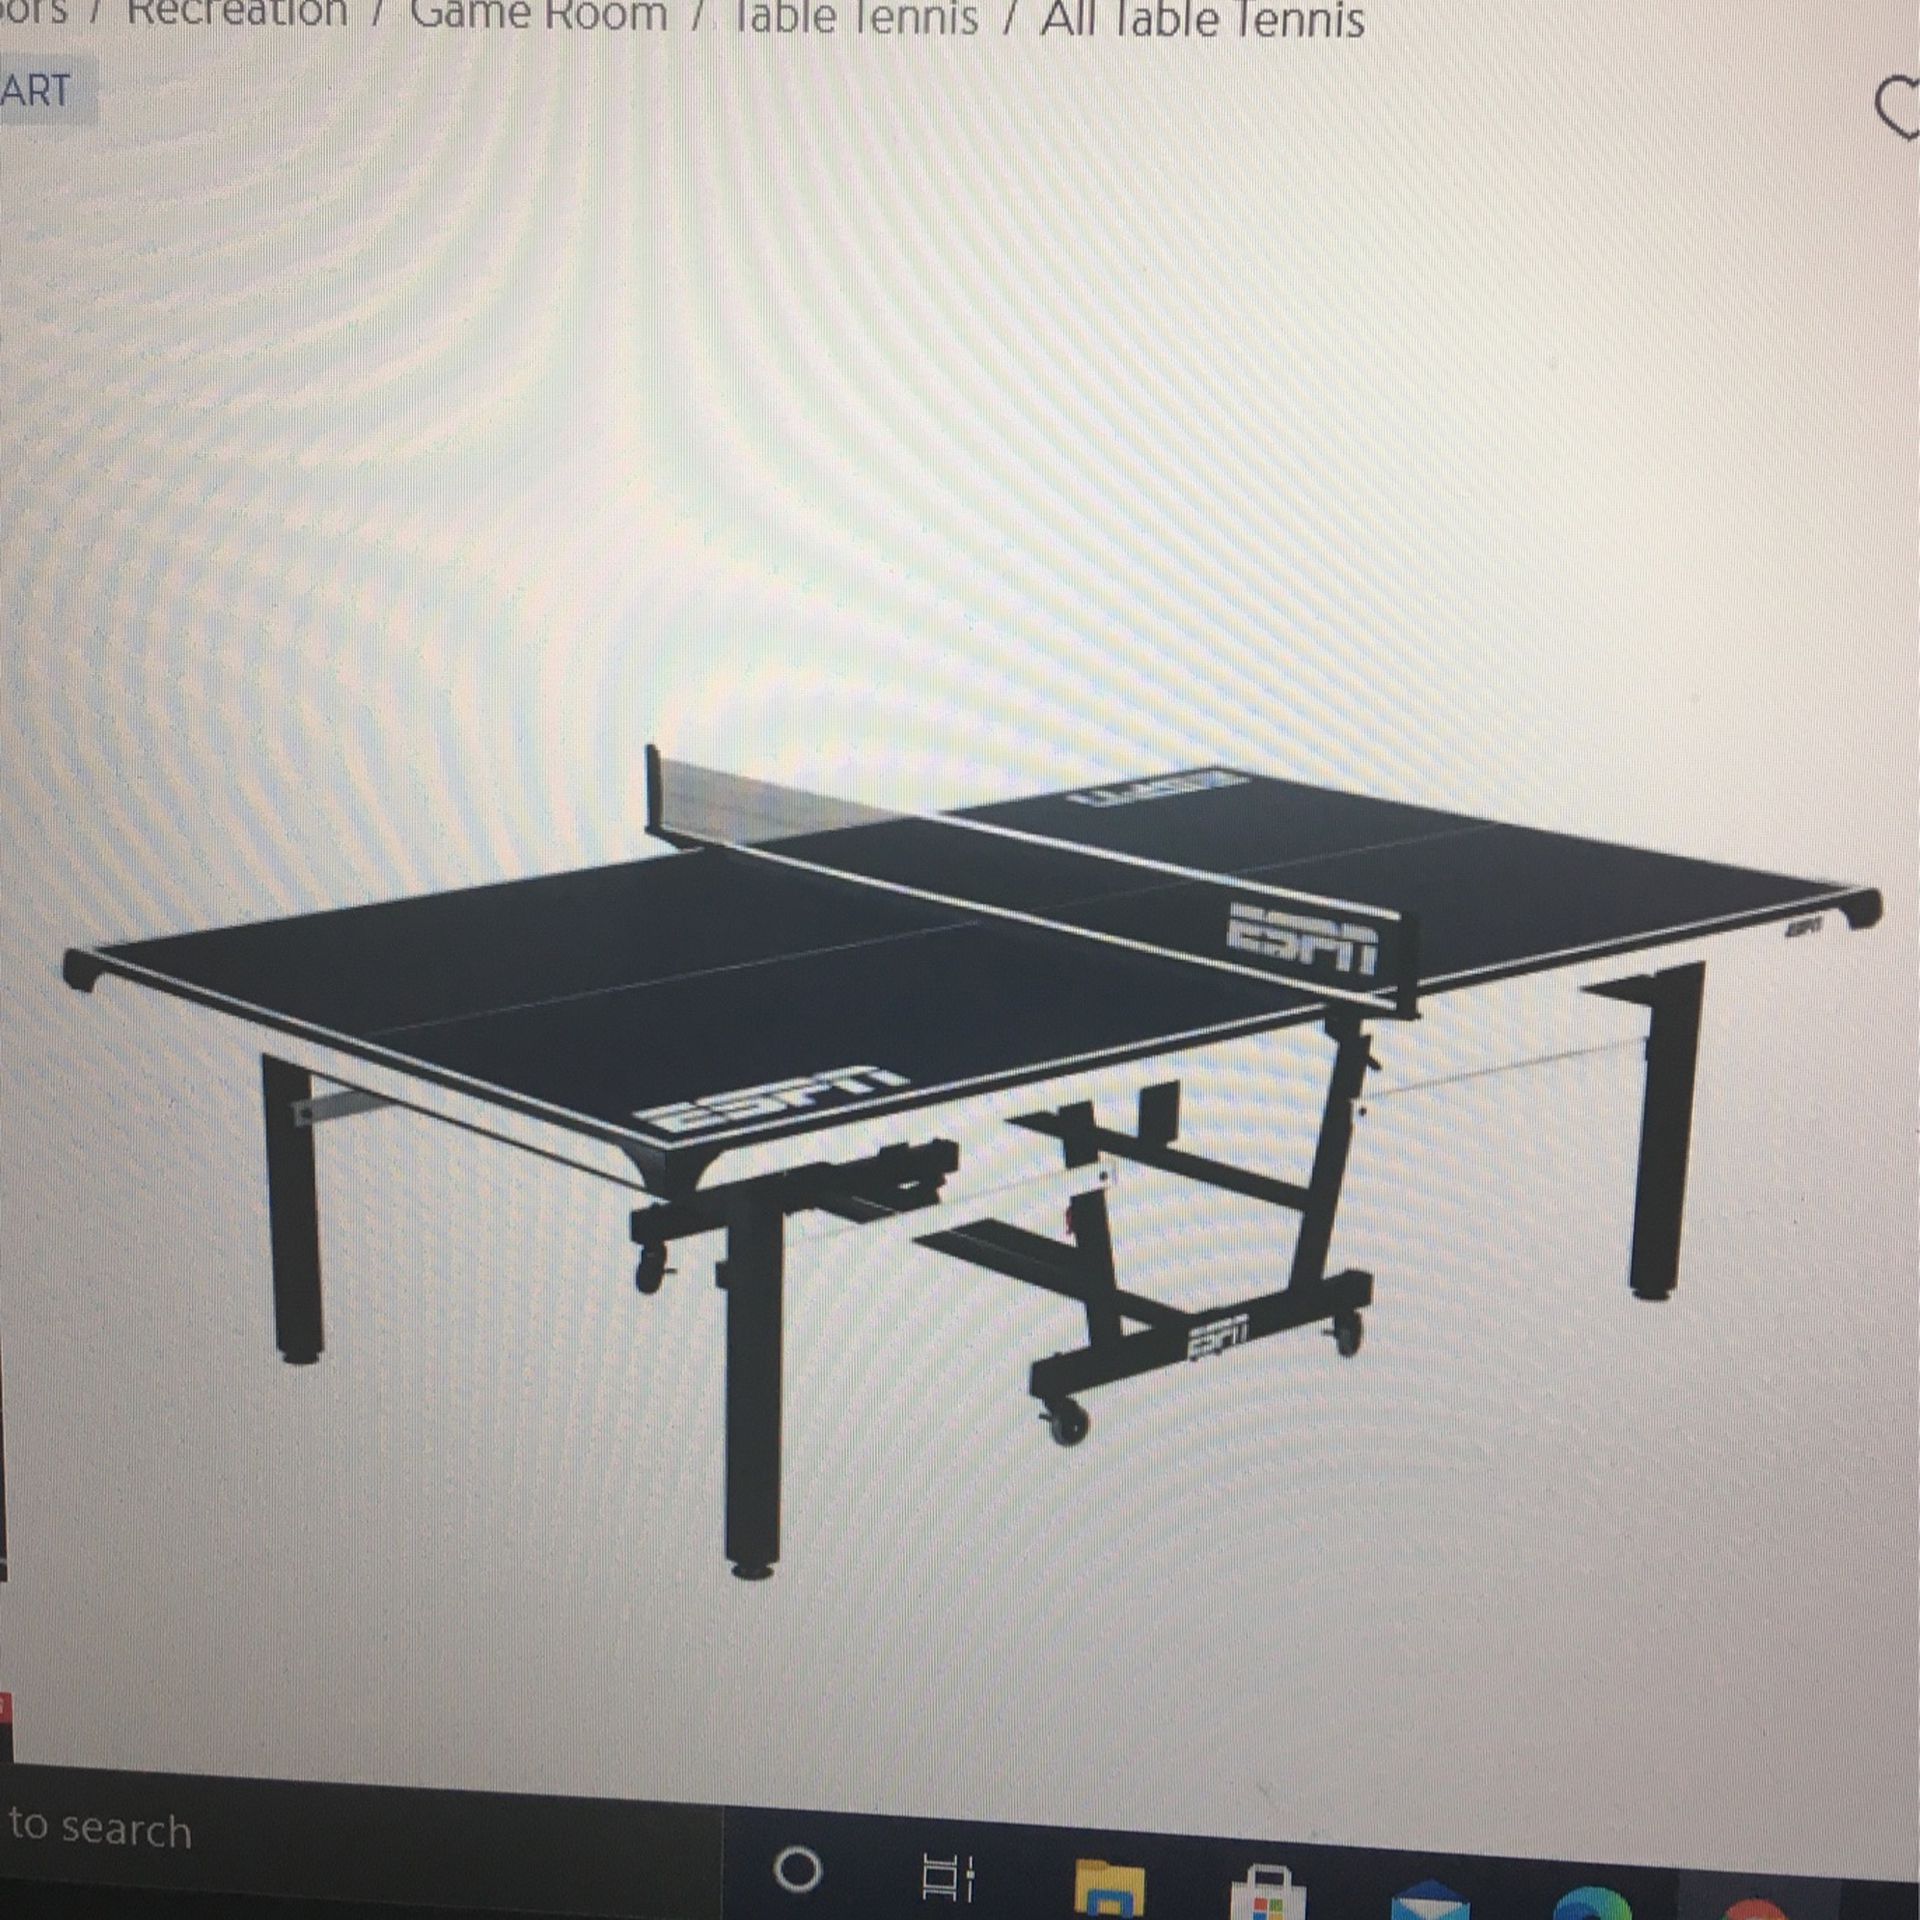 ESPN Official Size 18mm 2 piece Table Tennis Table With Table Cover